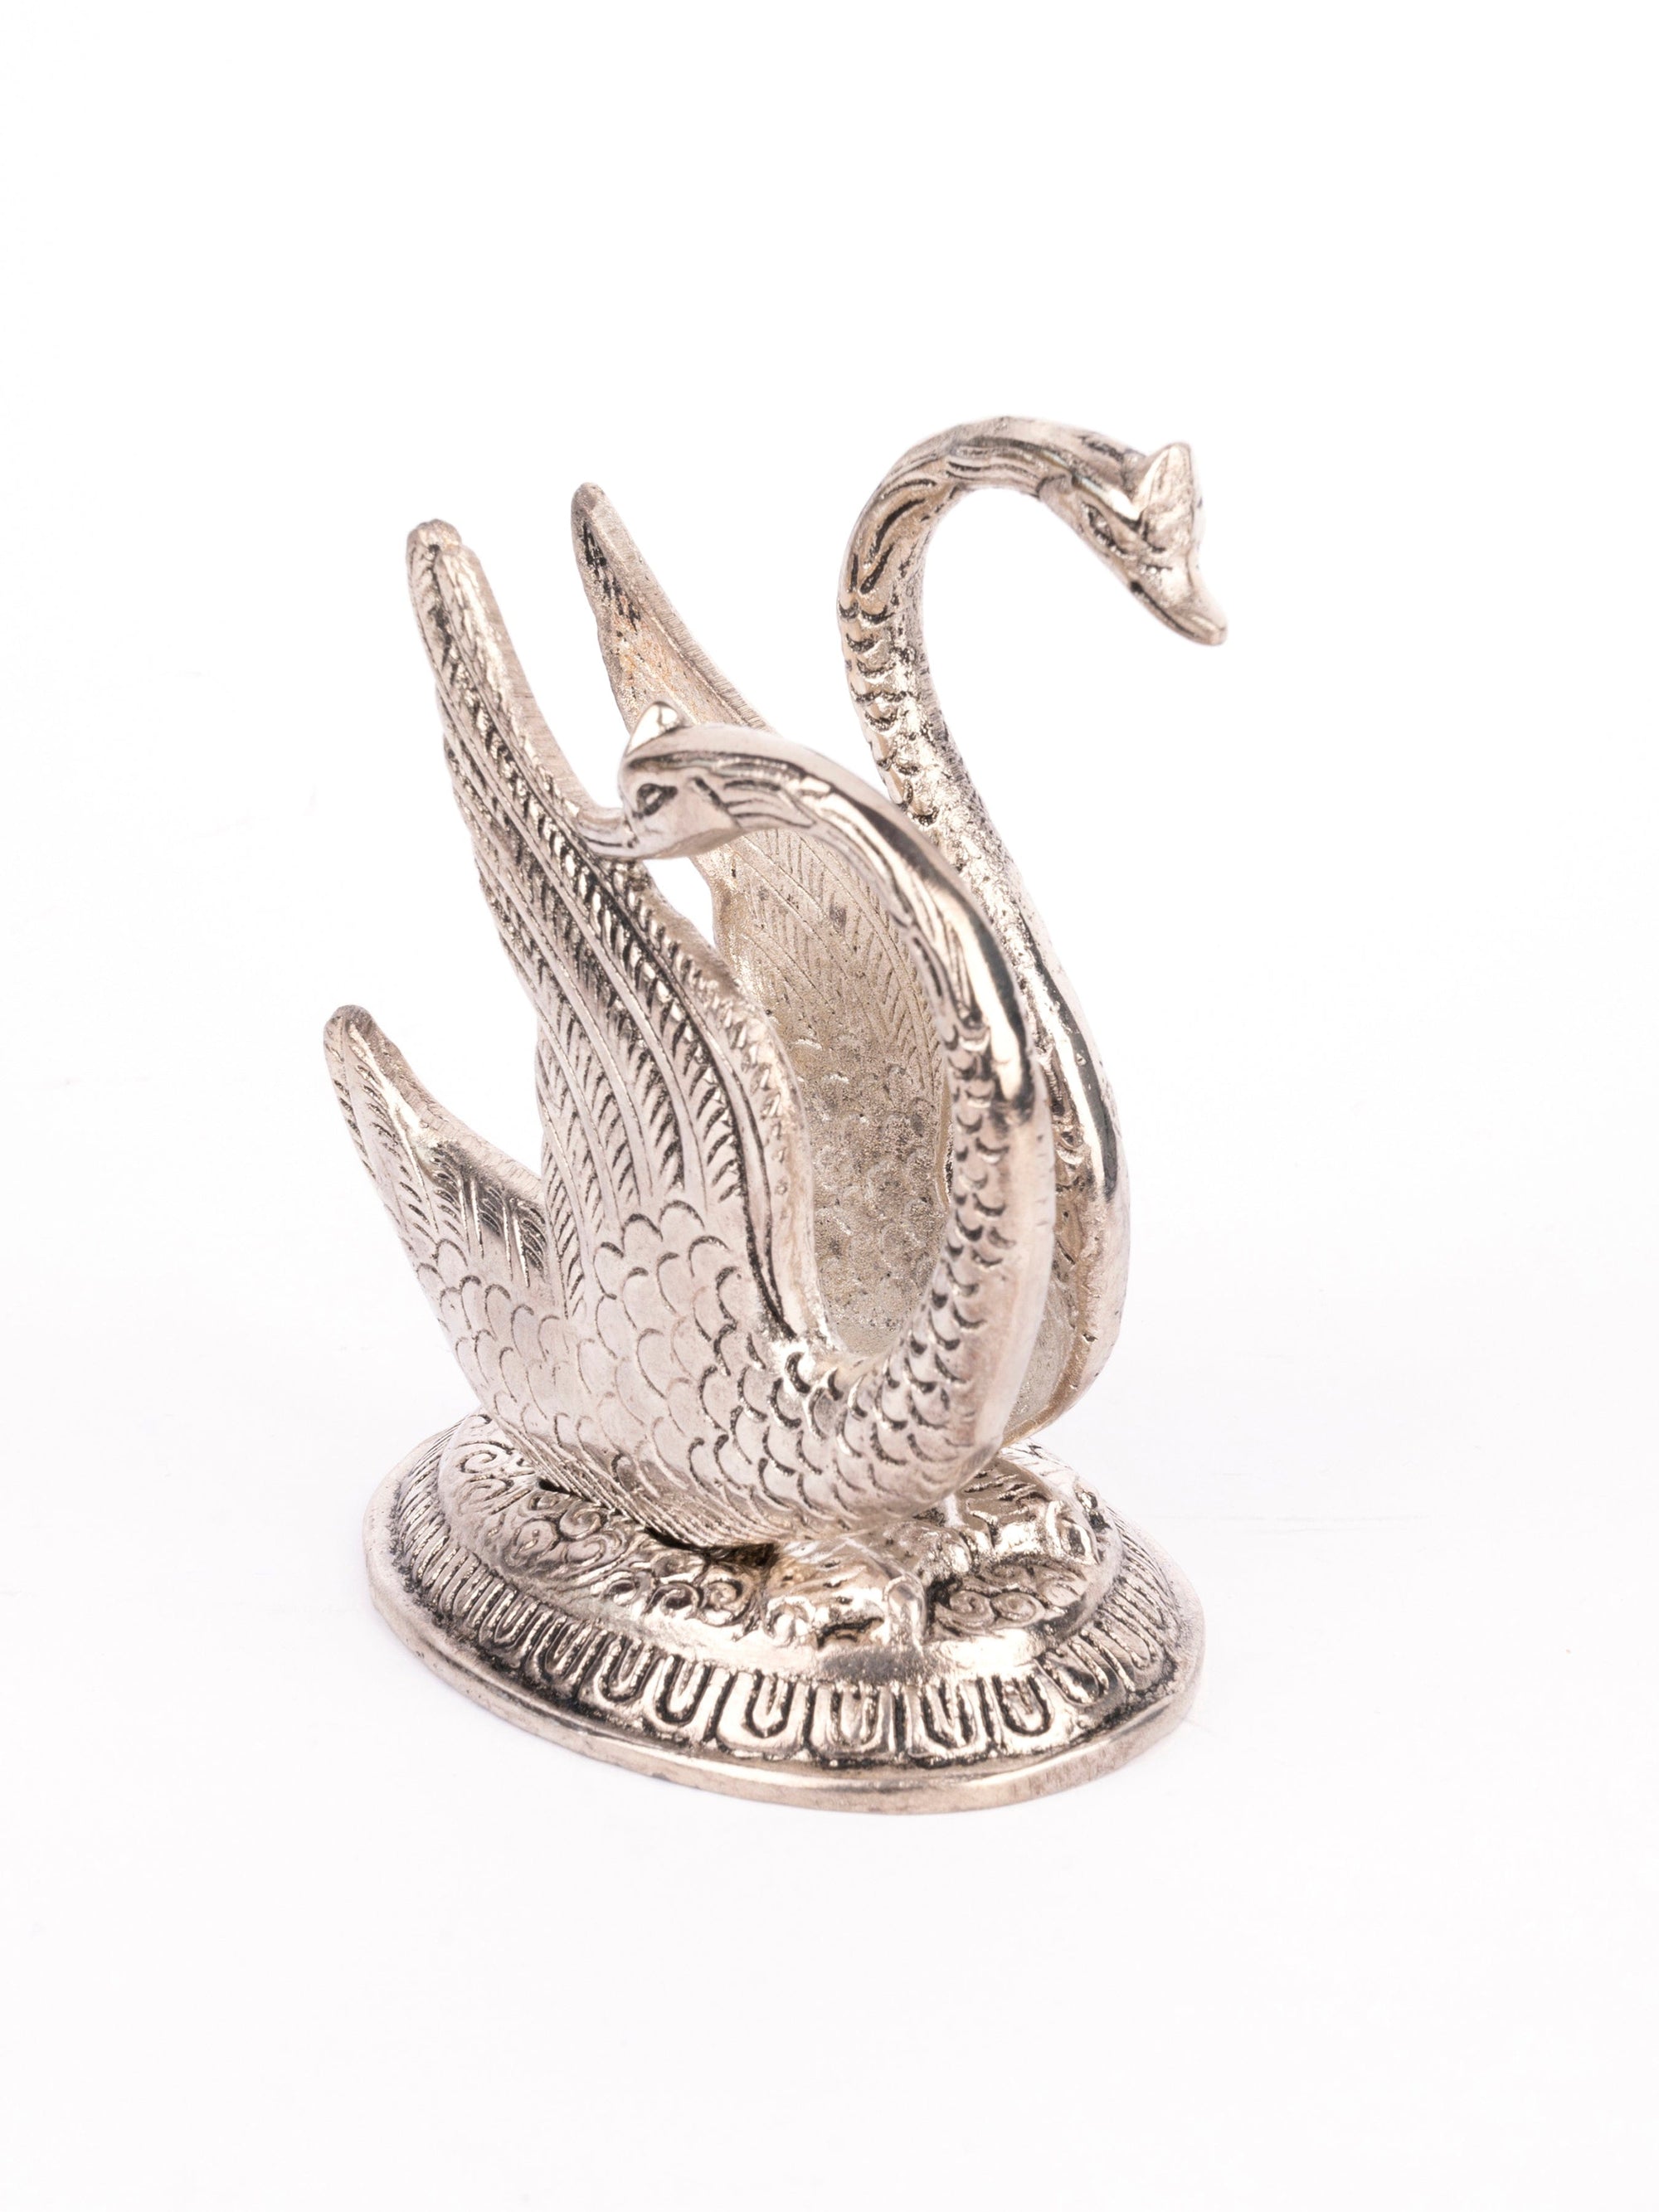 Aluminium Metal Silver Swan shaped Napkin / Tissue Paper holder - The Heritage Artifacts